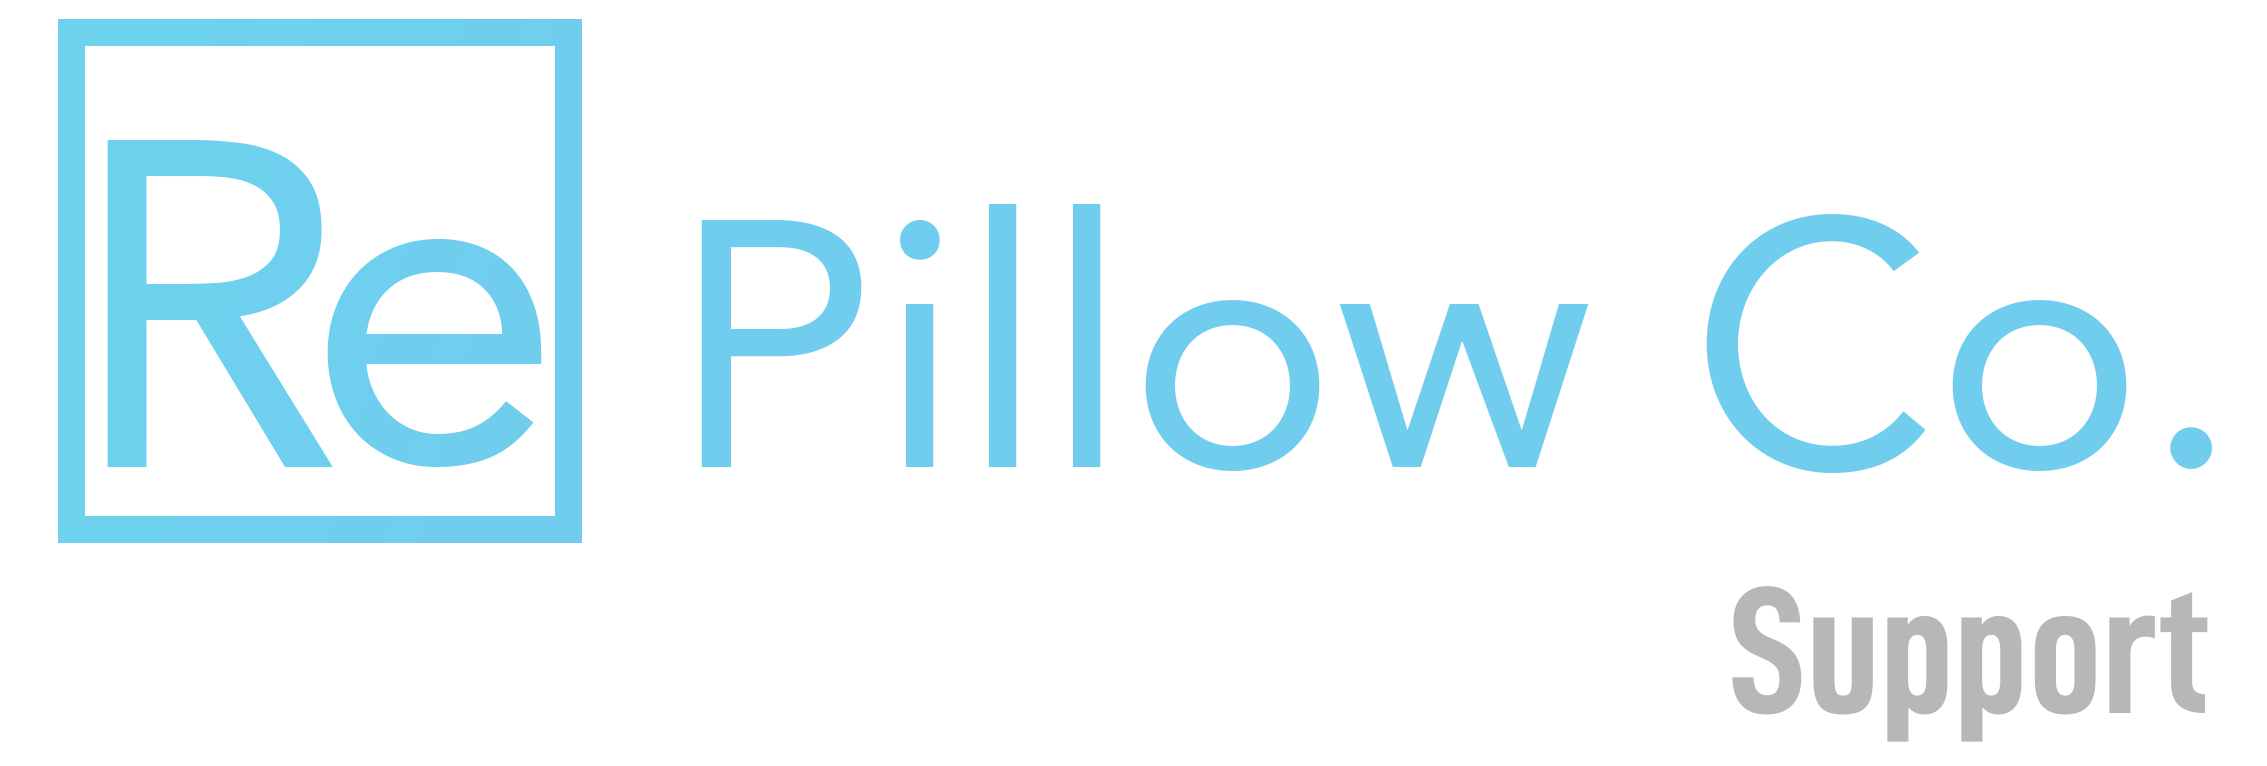 Re Pillow Co. Support